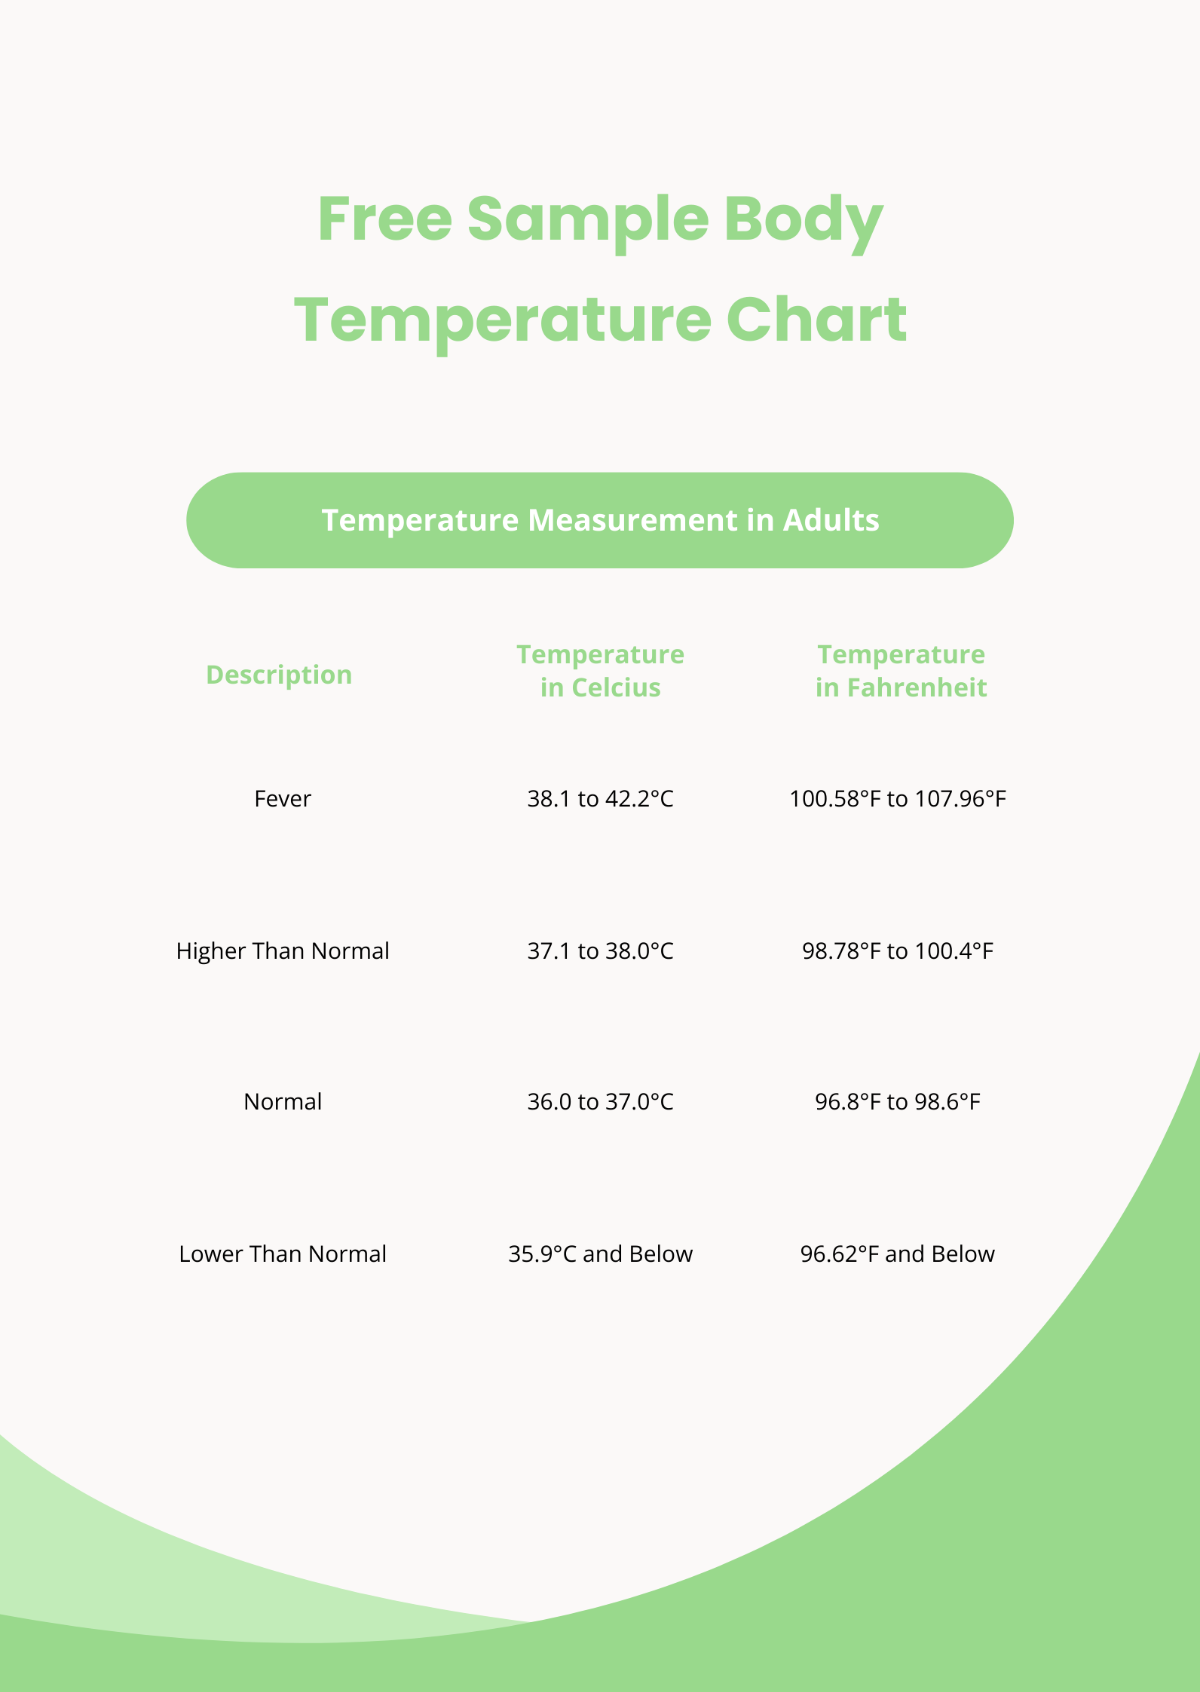 FREE Body Temperature Chart Templates & Examples - Edit Online & Download